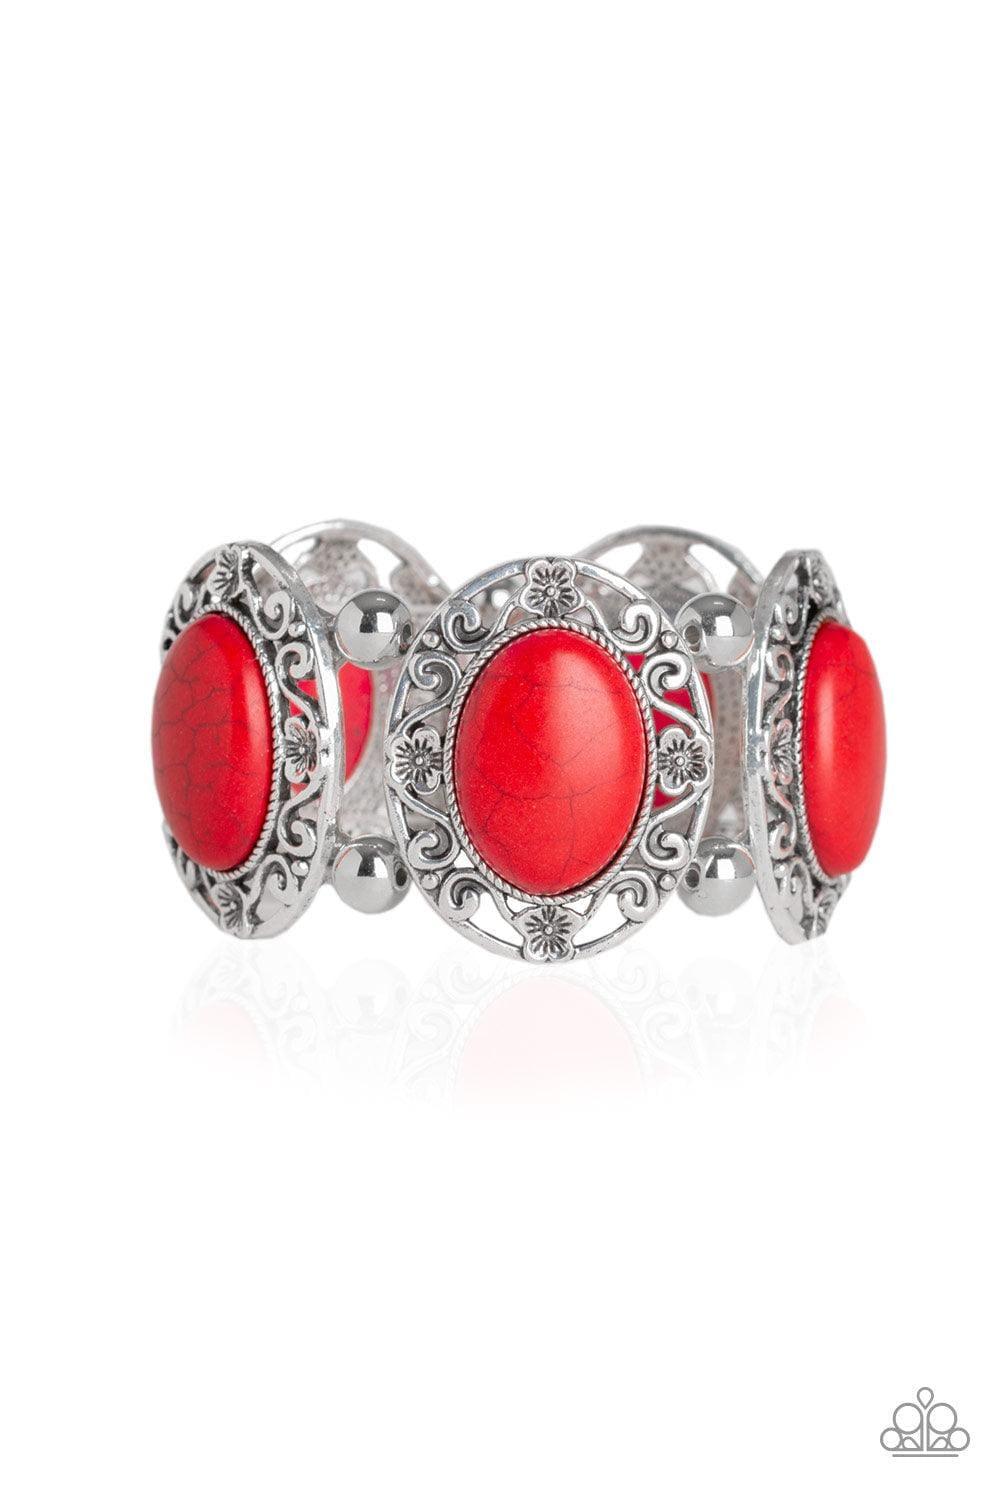 Paparazzi Accessories - Rodeo Rancho - Red Stretch Bracelet - Bling by JessieK